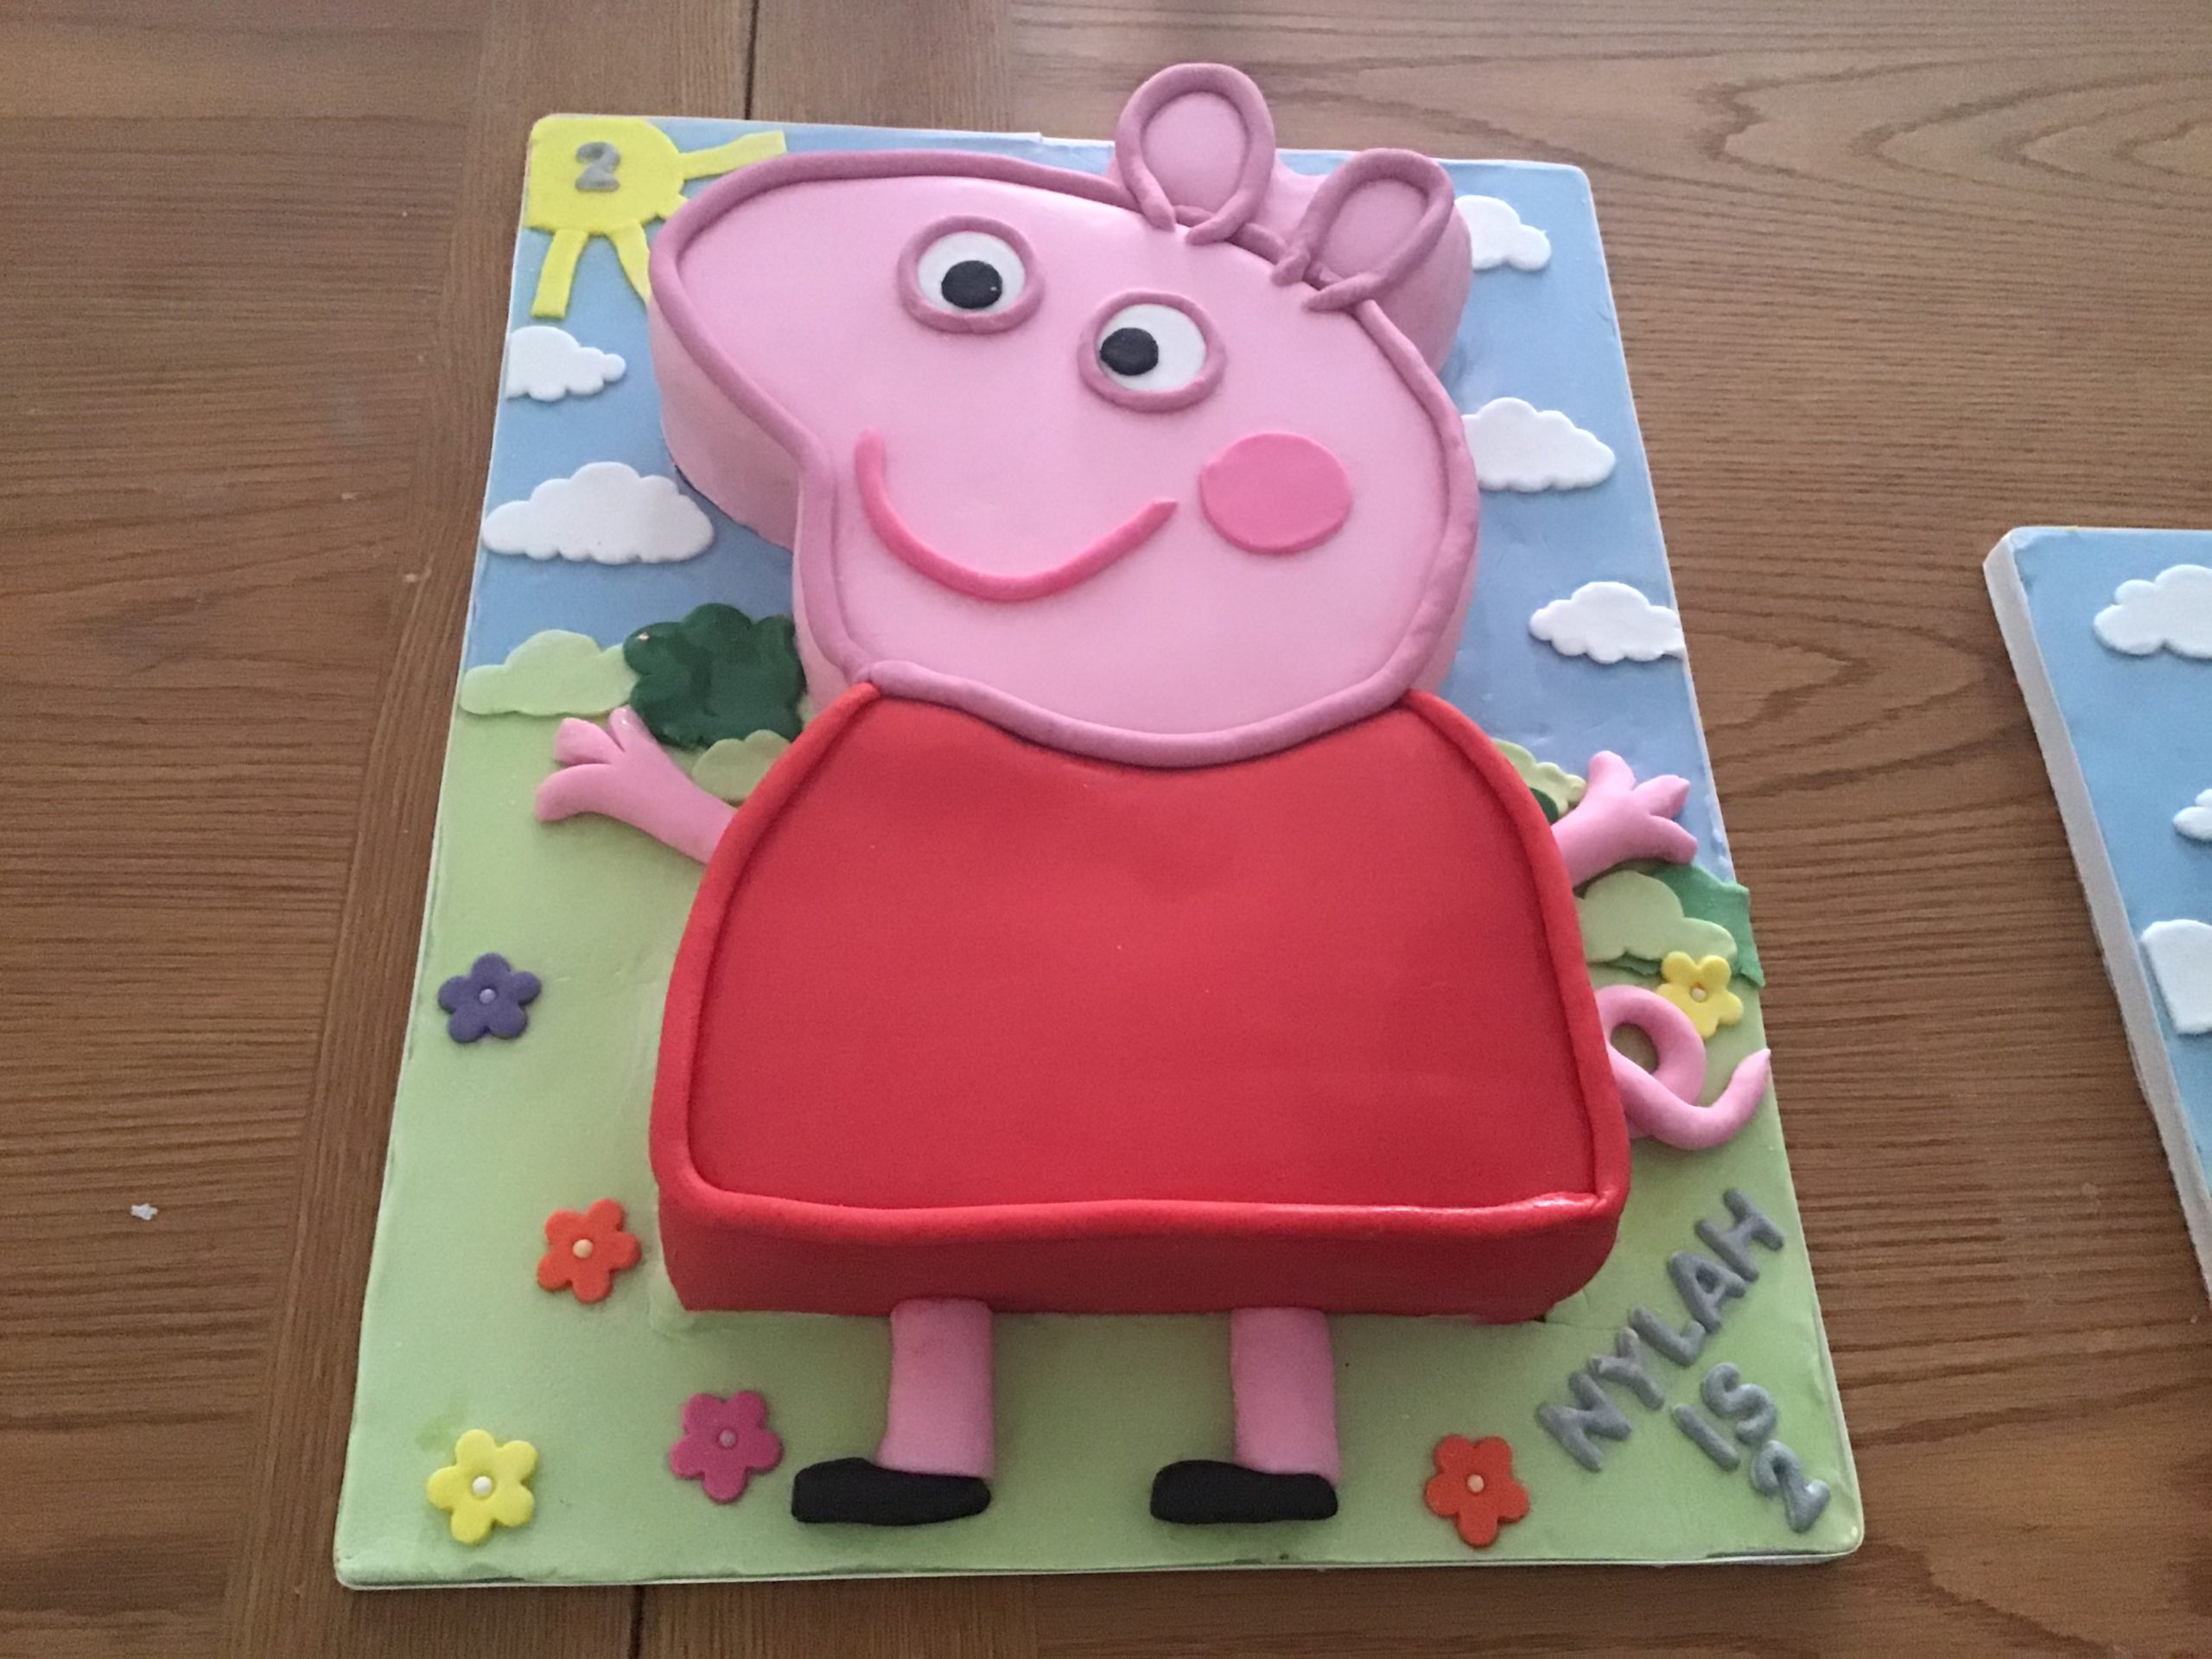 Peppa Pig Fondant Cake In ₹1,599.00 And Get Delivery In Delhi NCR » From  Theme Cake Store